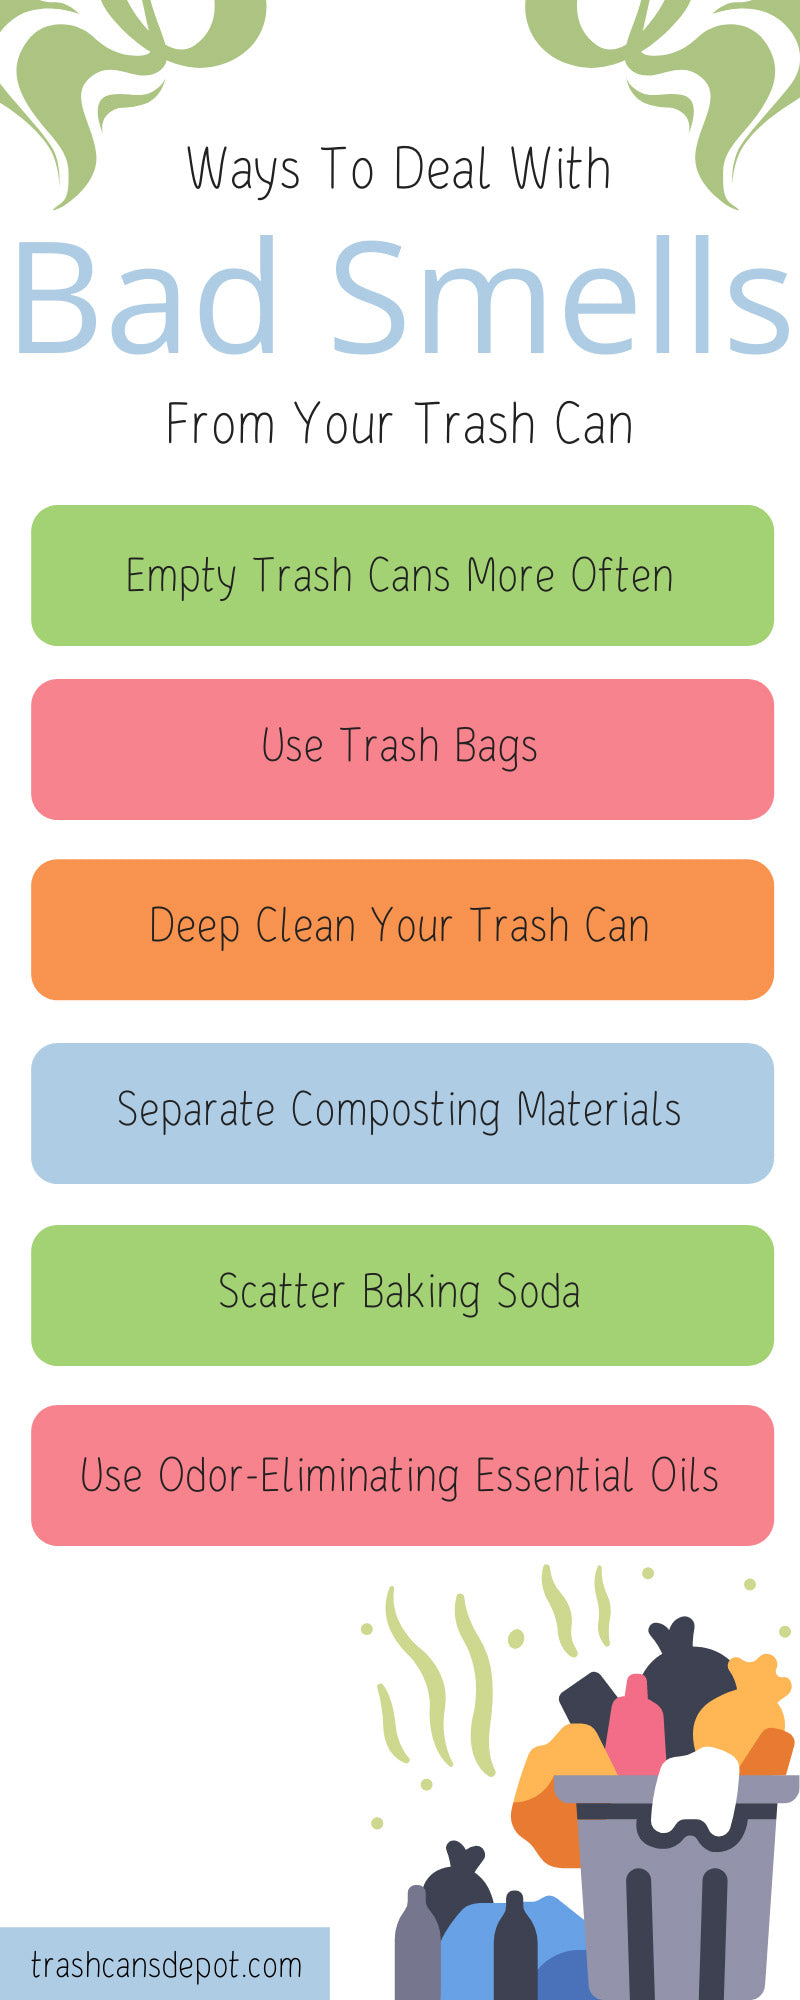 How to Keep a Garbage Can From Smelling: 4 Clever Ideas